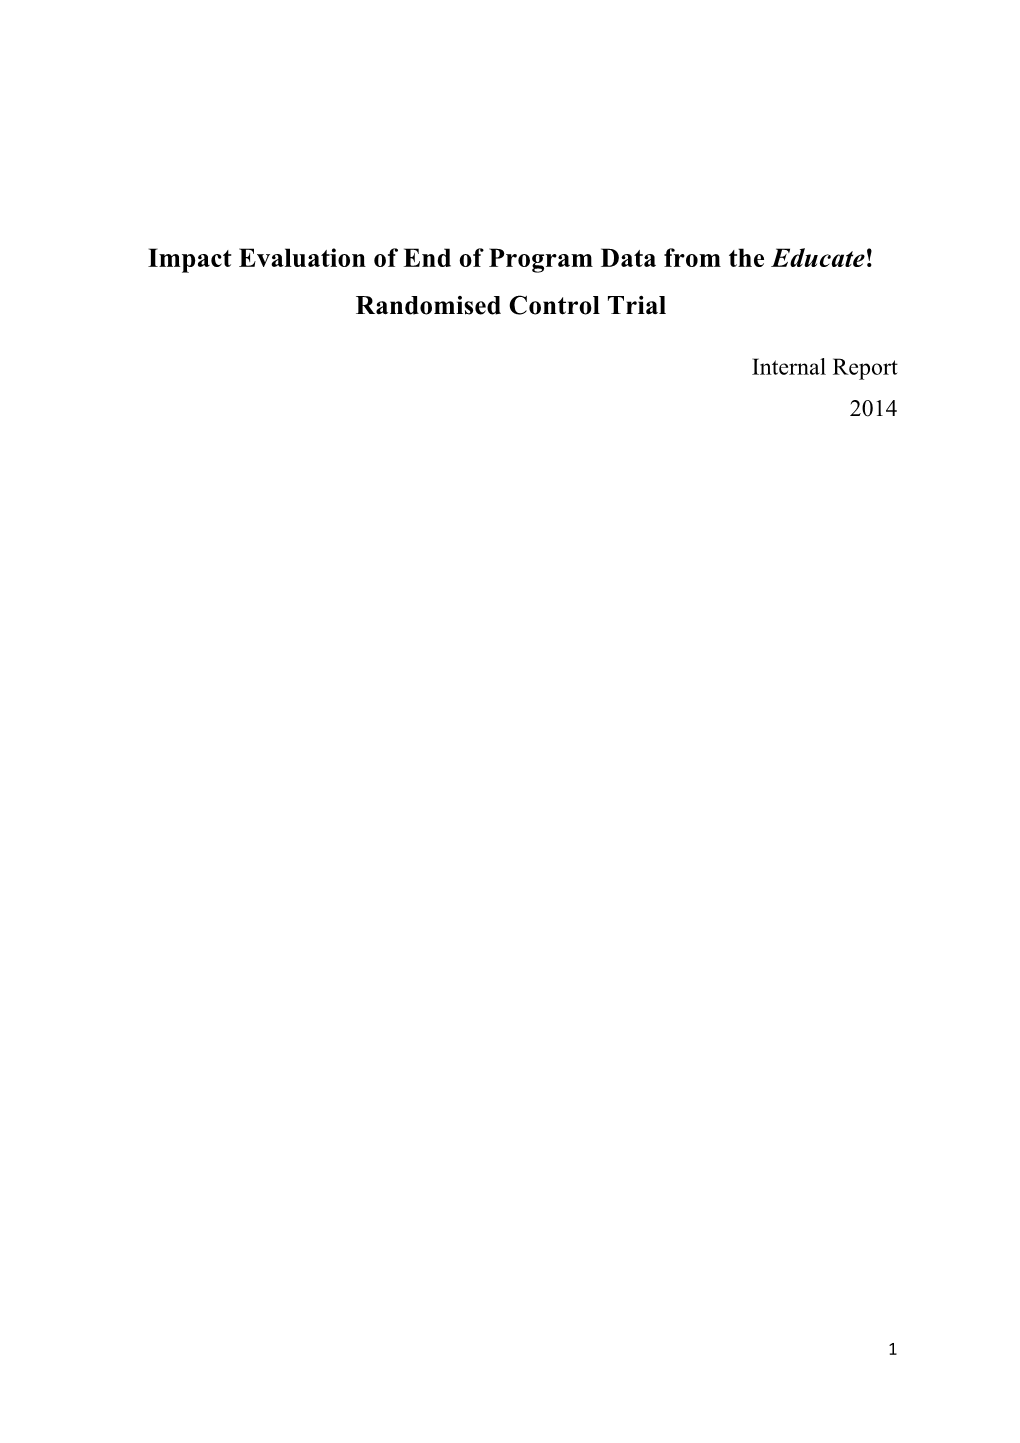 Impact Evaluation of End of Program Data from the Educate! Randomised Control Trial